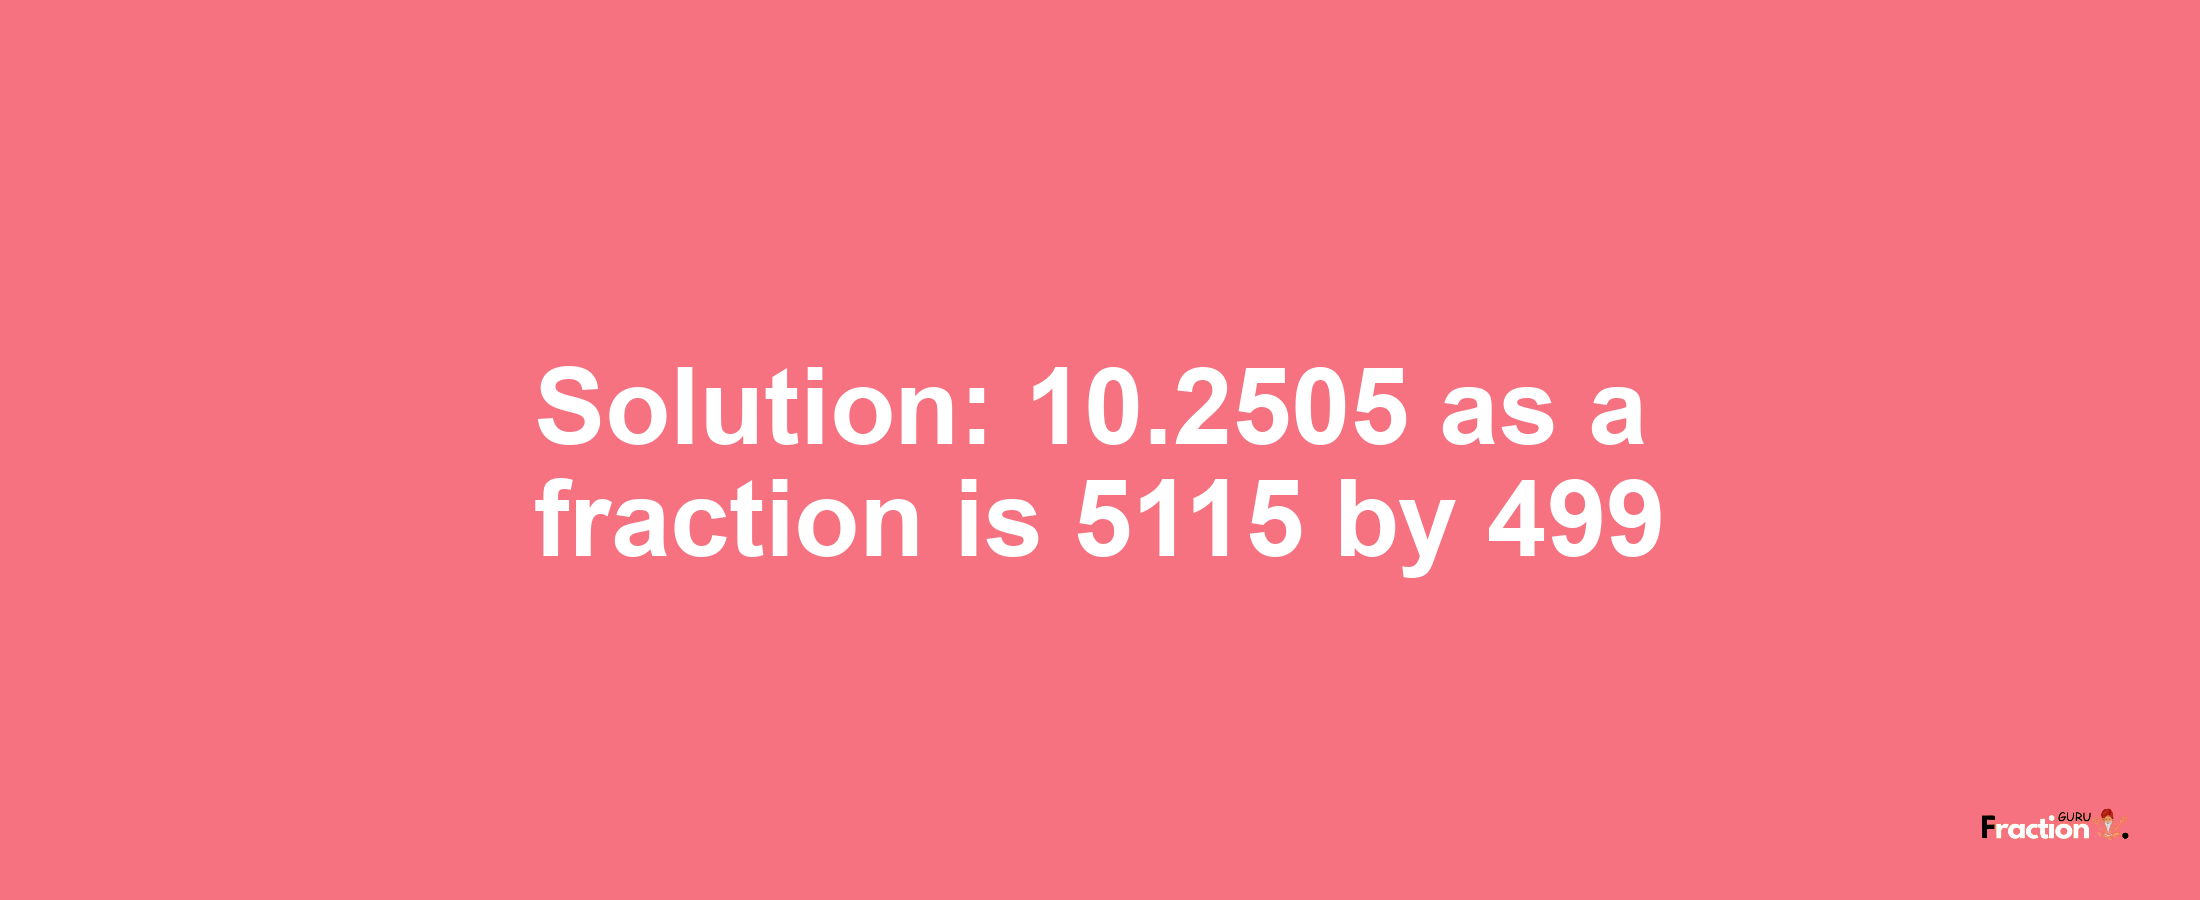 Solution:10.2505 as a fraction is 5115/499